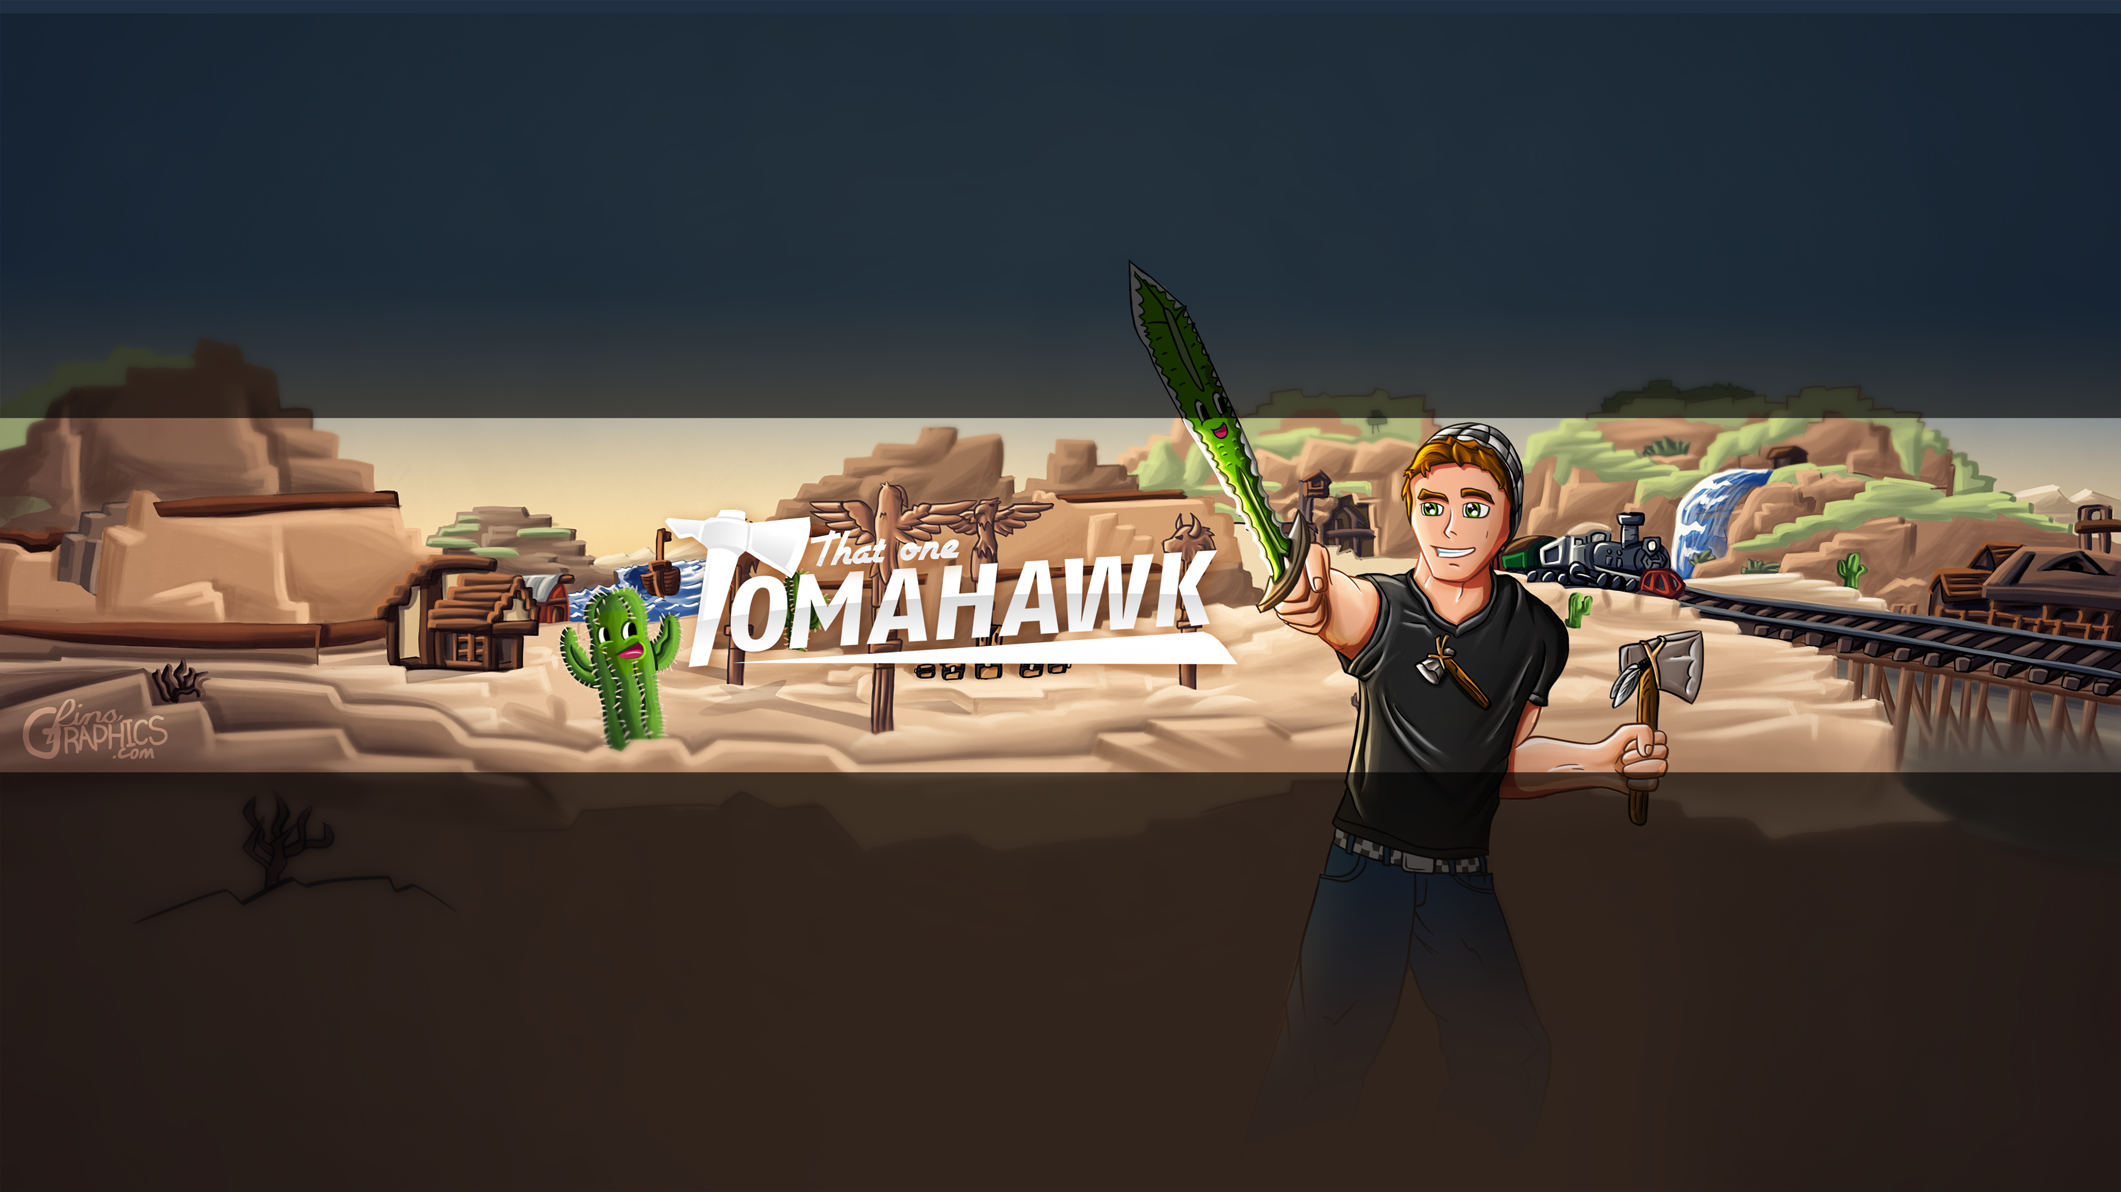 Finsgraphics Thatoomahawk Banner